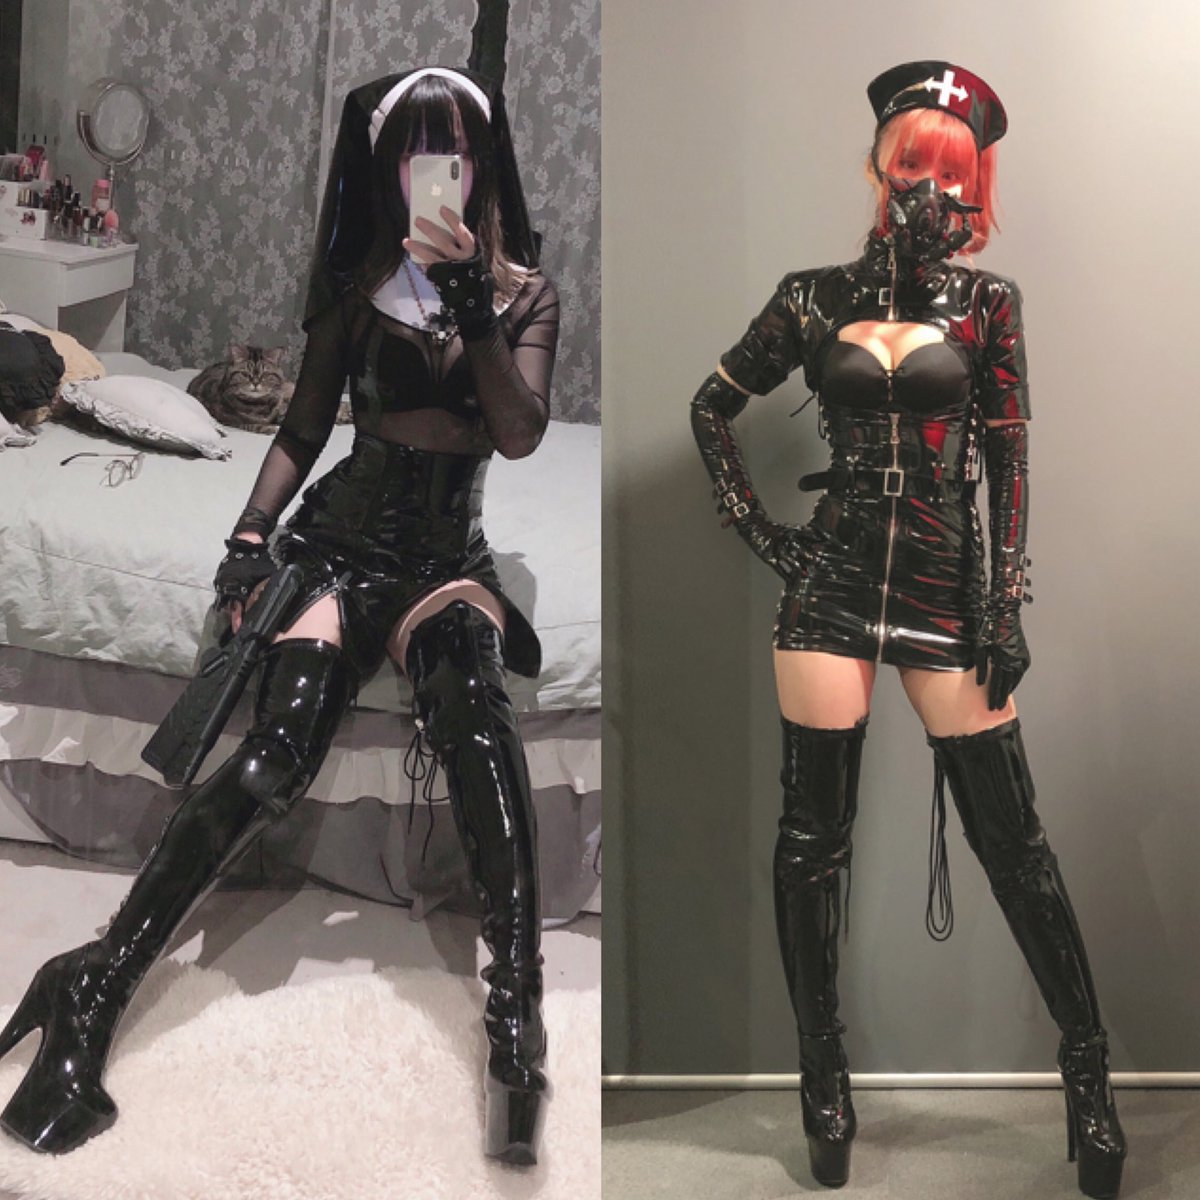 Asian Japanese lesbians in latex catsuits 18+ — Video | VK